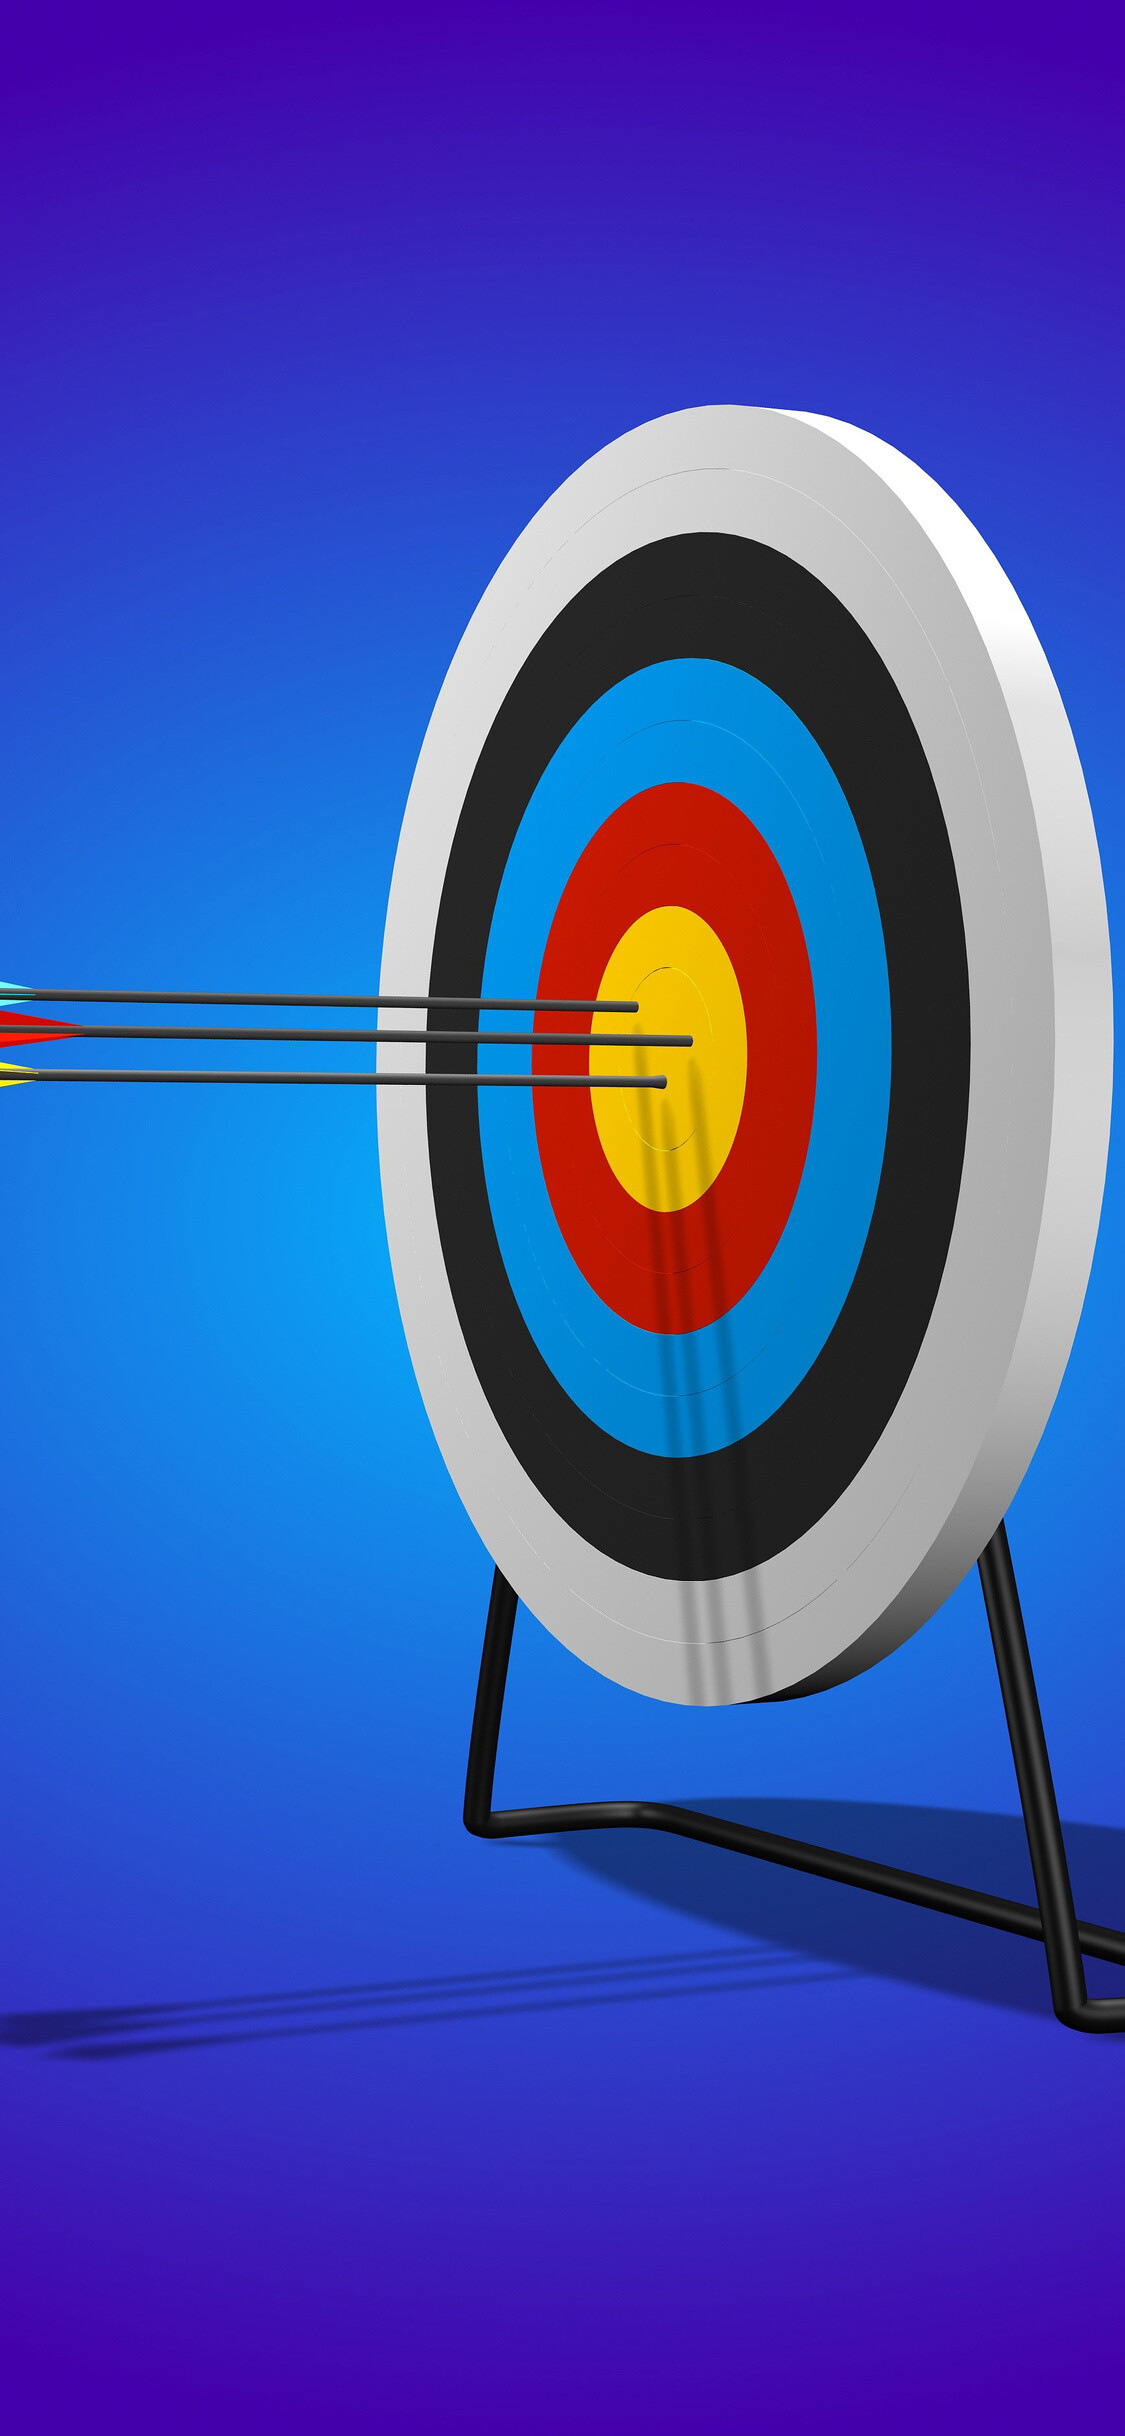 Goal (Aim): Arrows, Stationary non-reactive target, Shooting sport, Target archery. 1130x2440 HD Background.